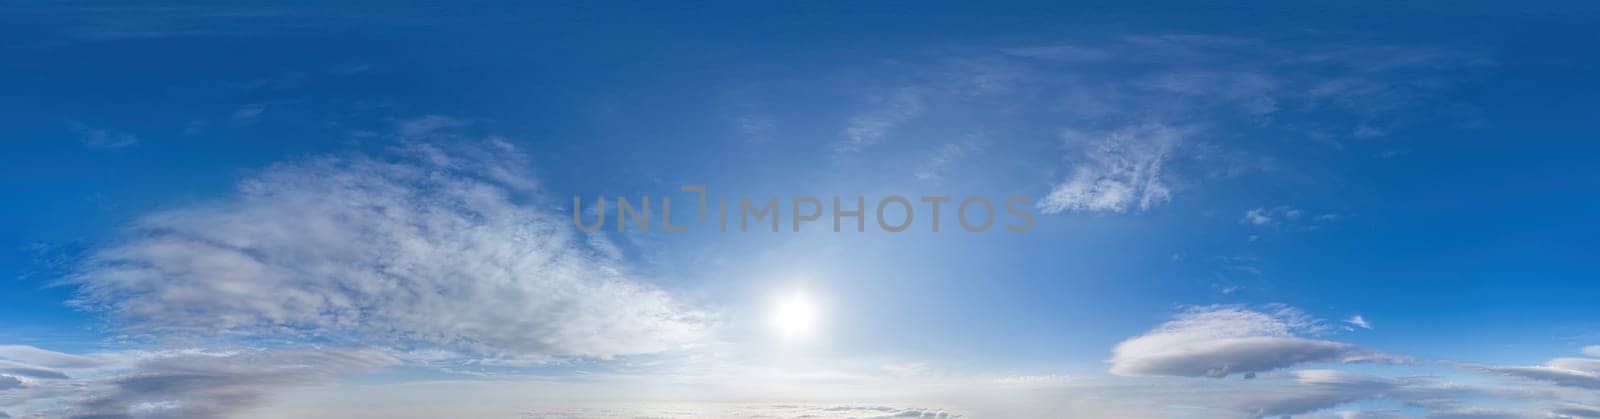 sky part of panorama with clouds, without ground, for easy use in 3D graphics and panorama for composites in aerial and ground spherical panoramas as a sky dome. by panophotograph